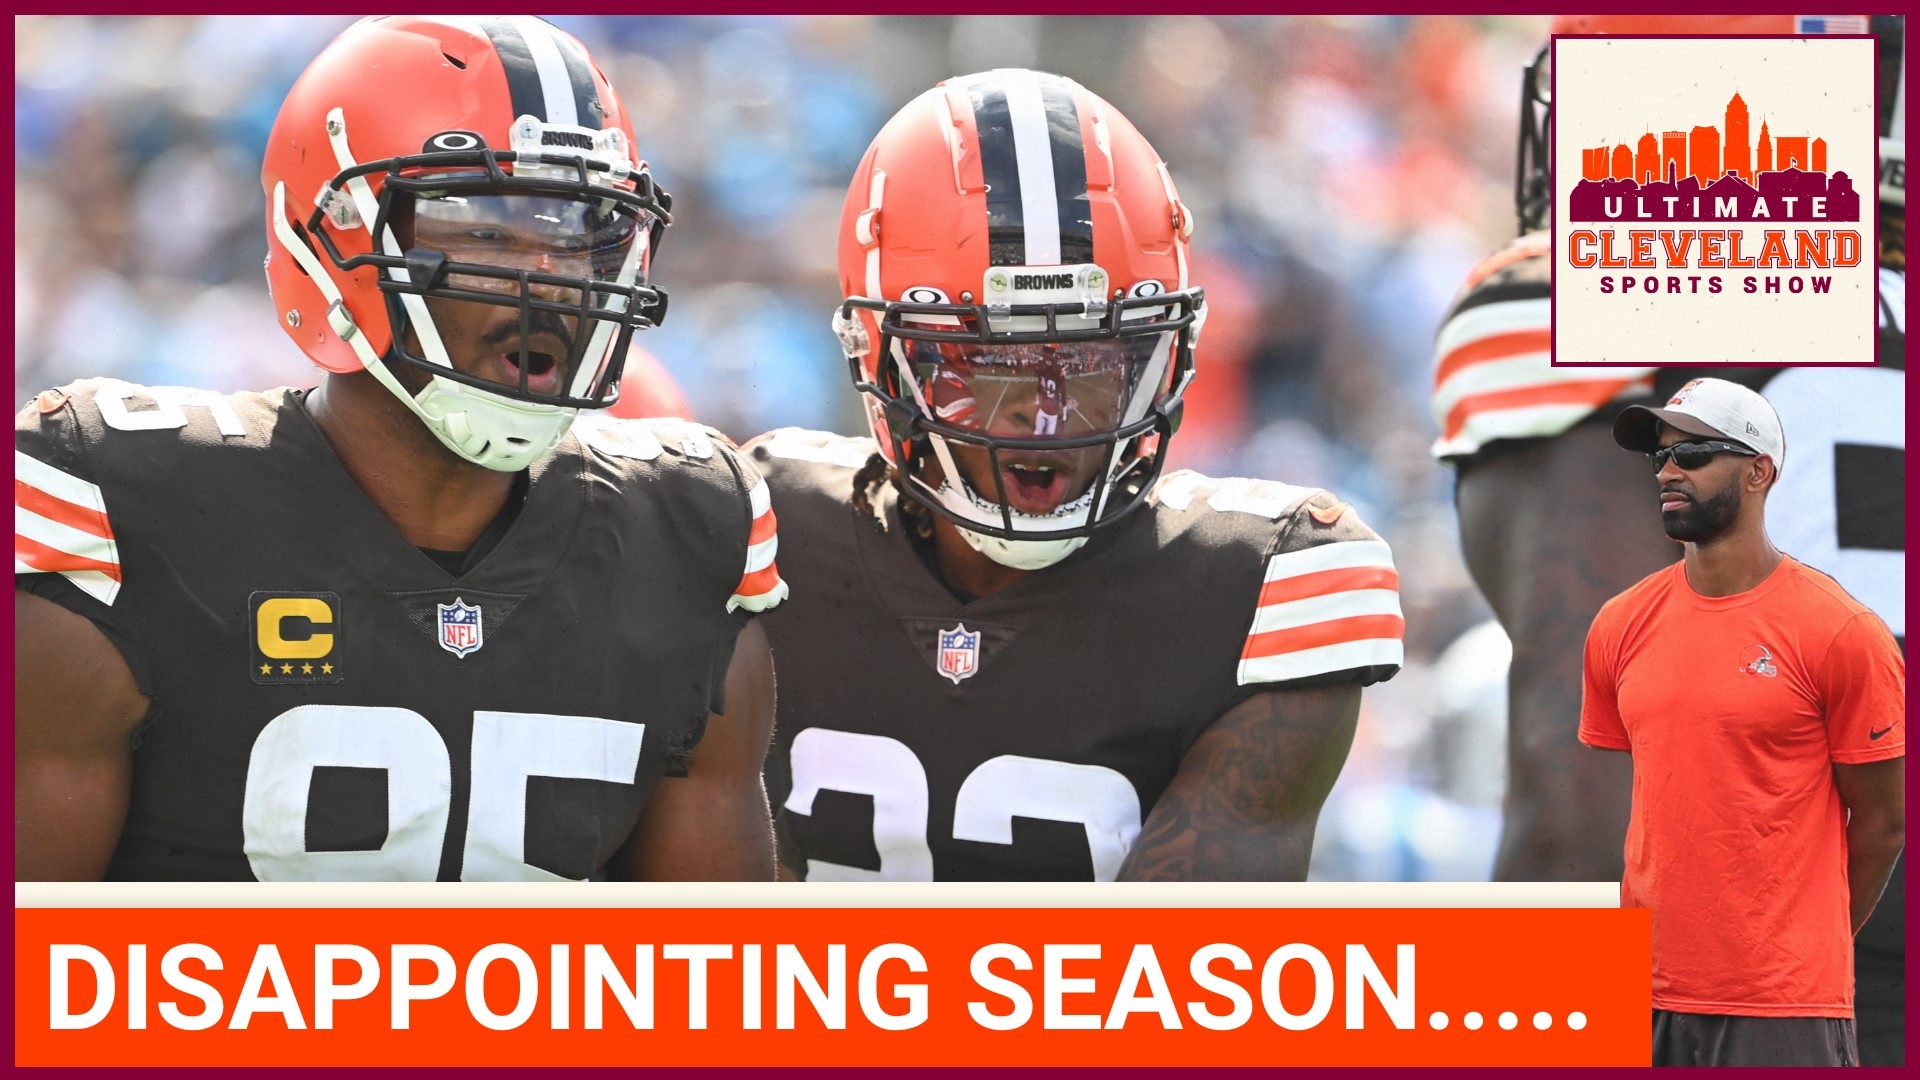 The Cleveland Browns season was DISAPPOINTING! What grade would